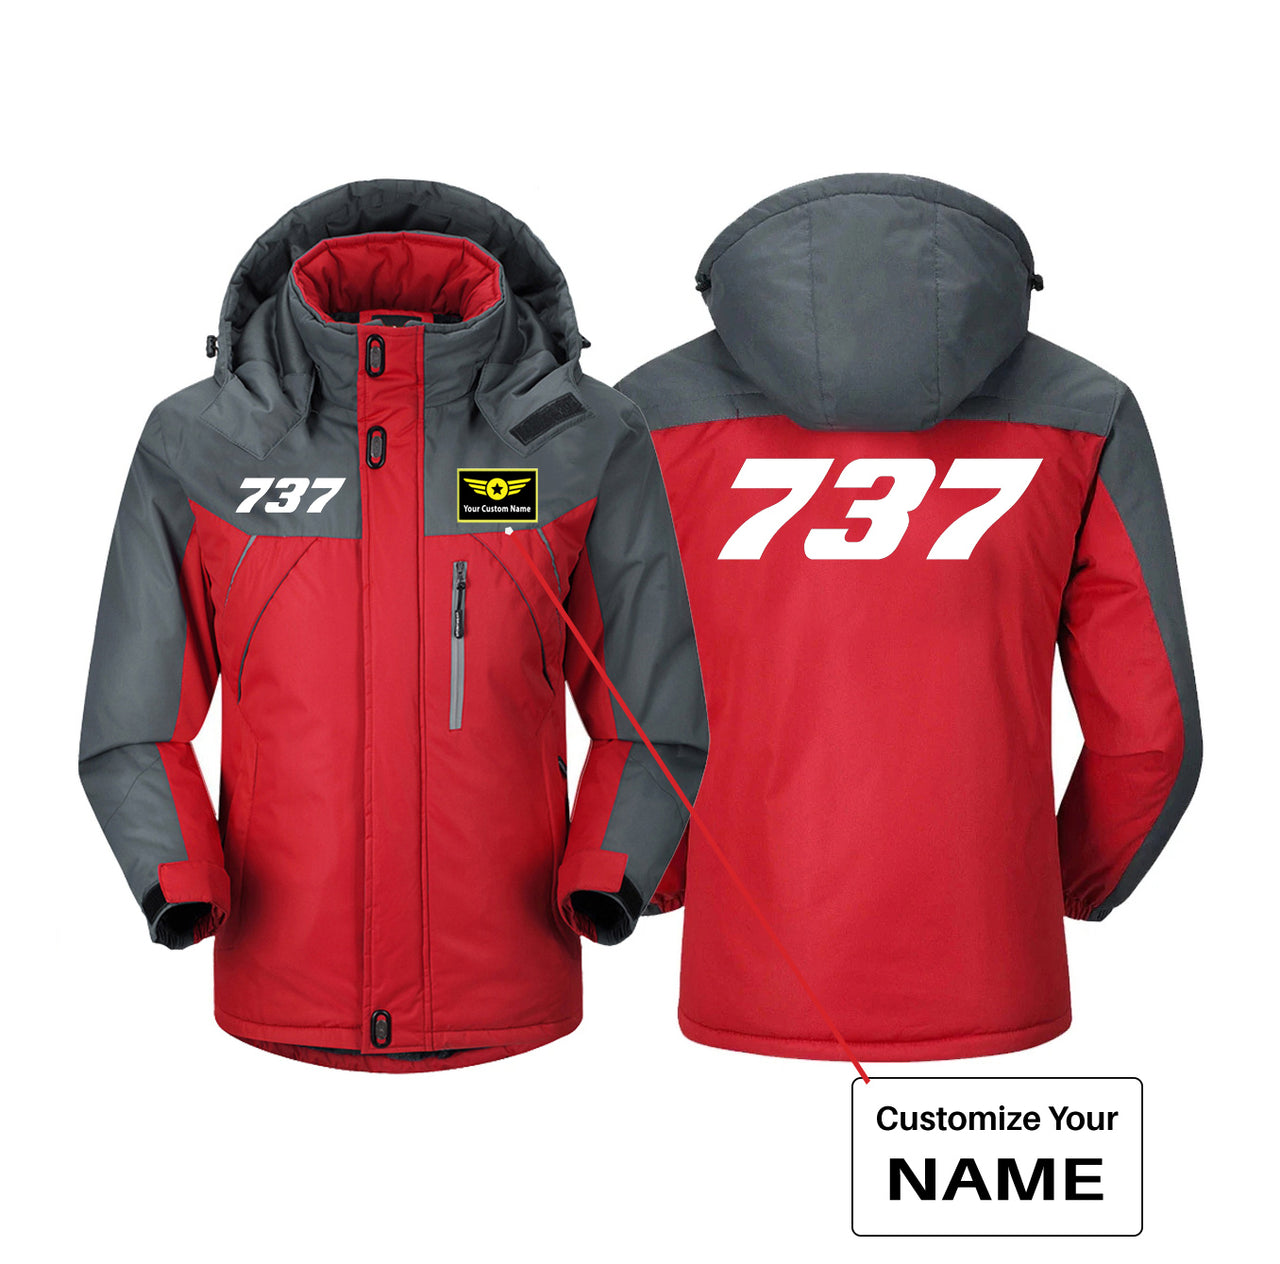 737 Flat Text Designed Thick Winter Jackets